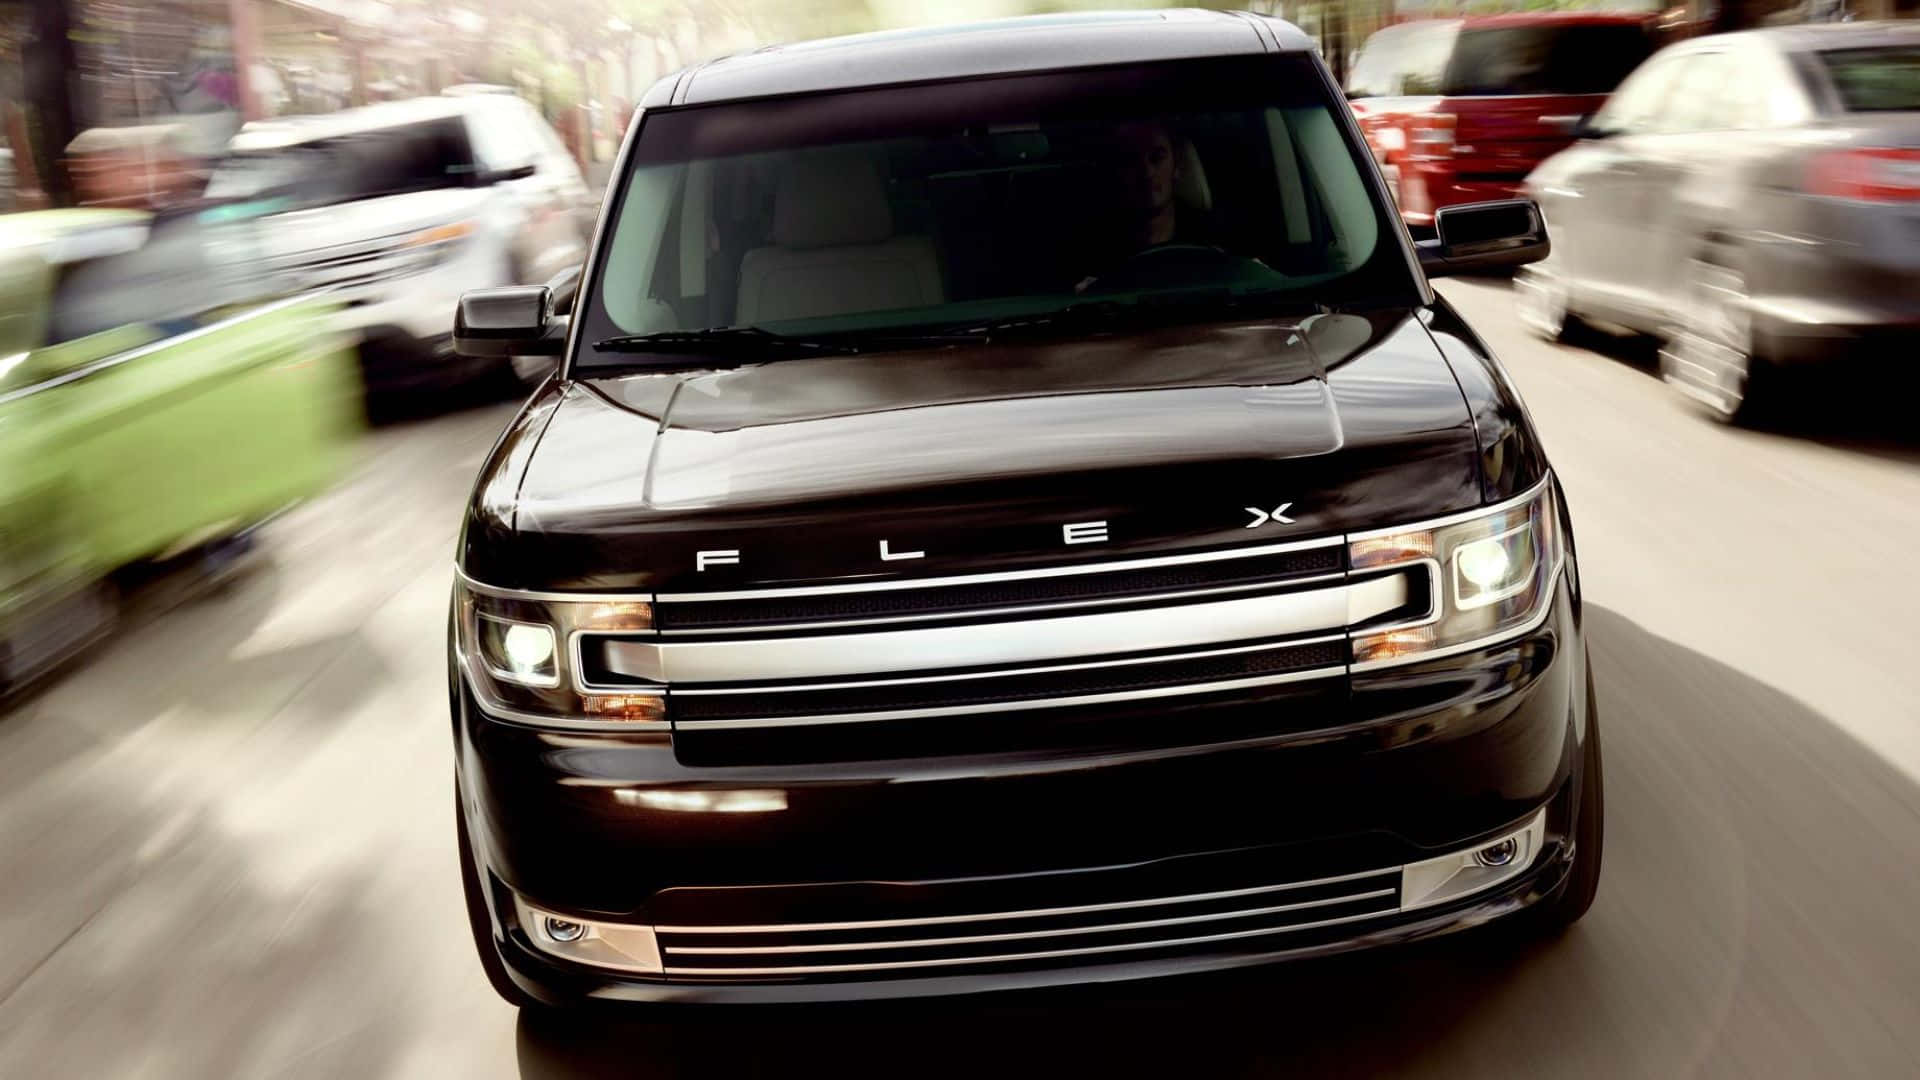 Sleek and Stylish Ford Flex on the Road Wallpaper